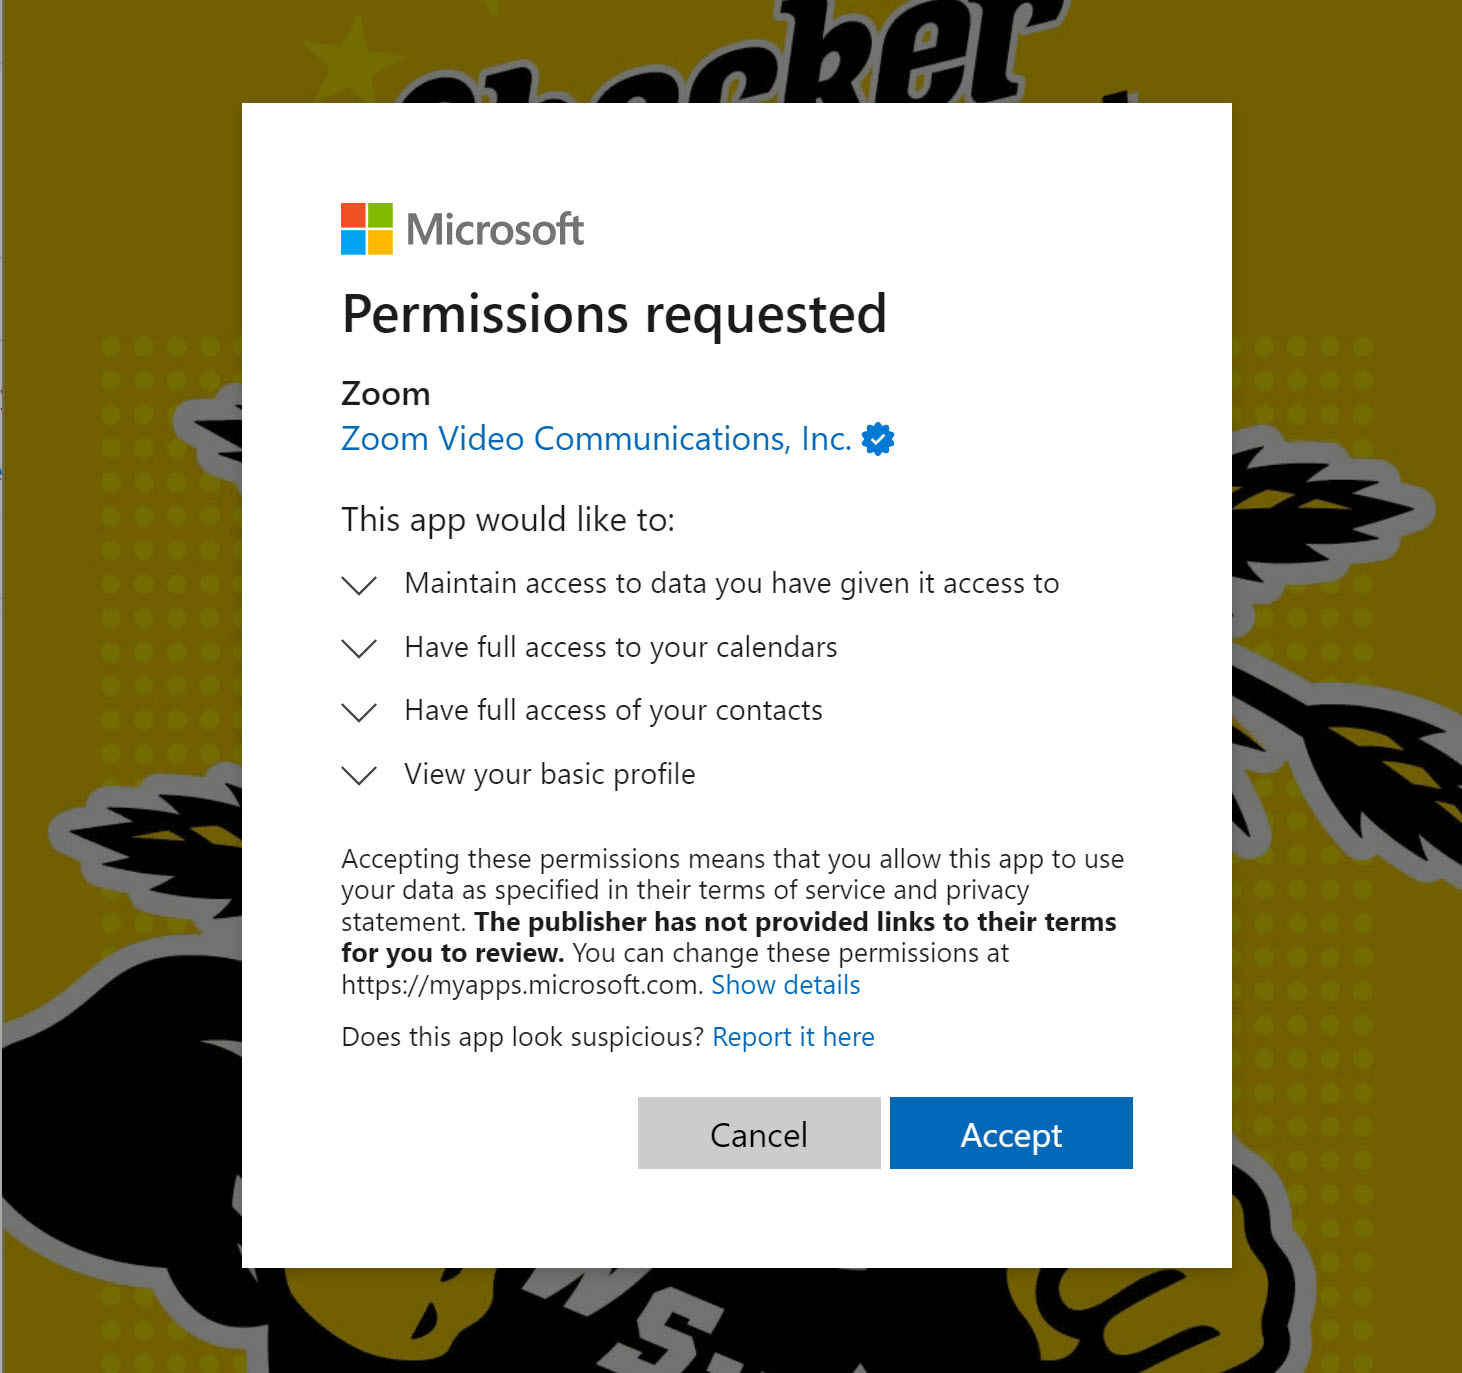 Provide permissions for Zoom to interact with Microsoft if prompted